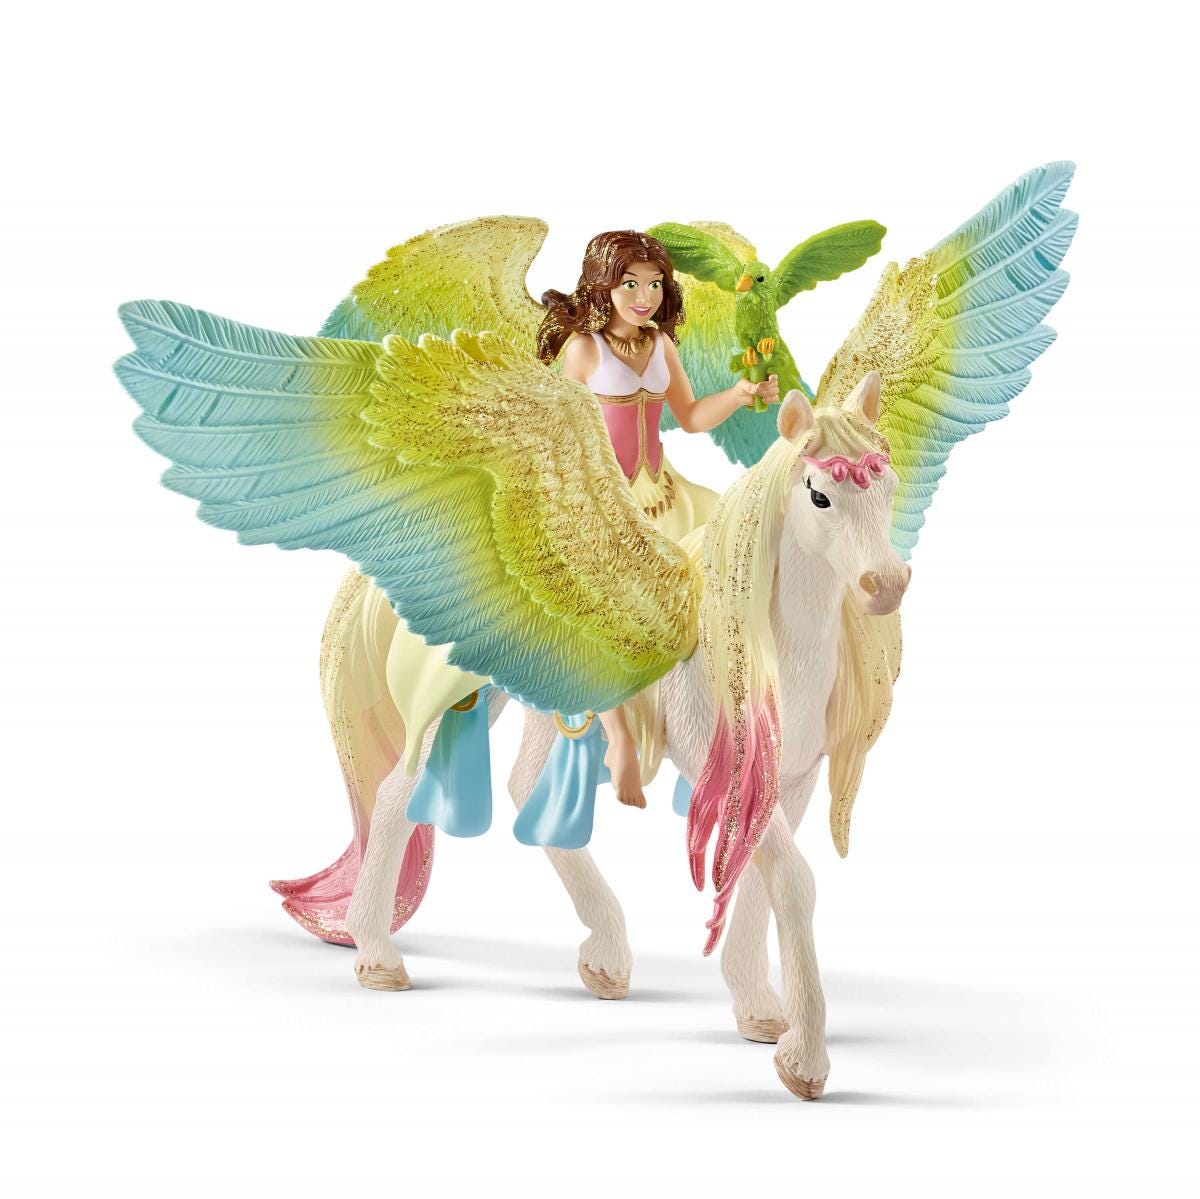 BAYALA® – the world of fairies and magical creatures | schleich®